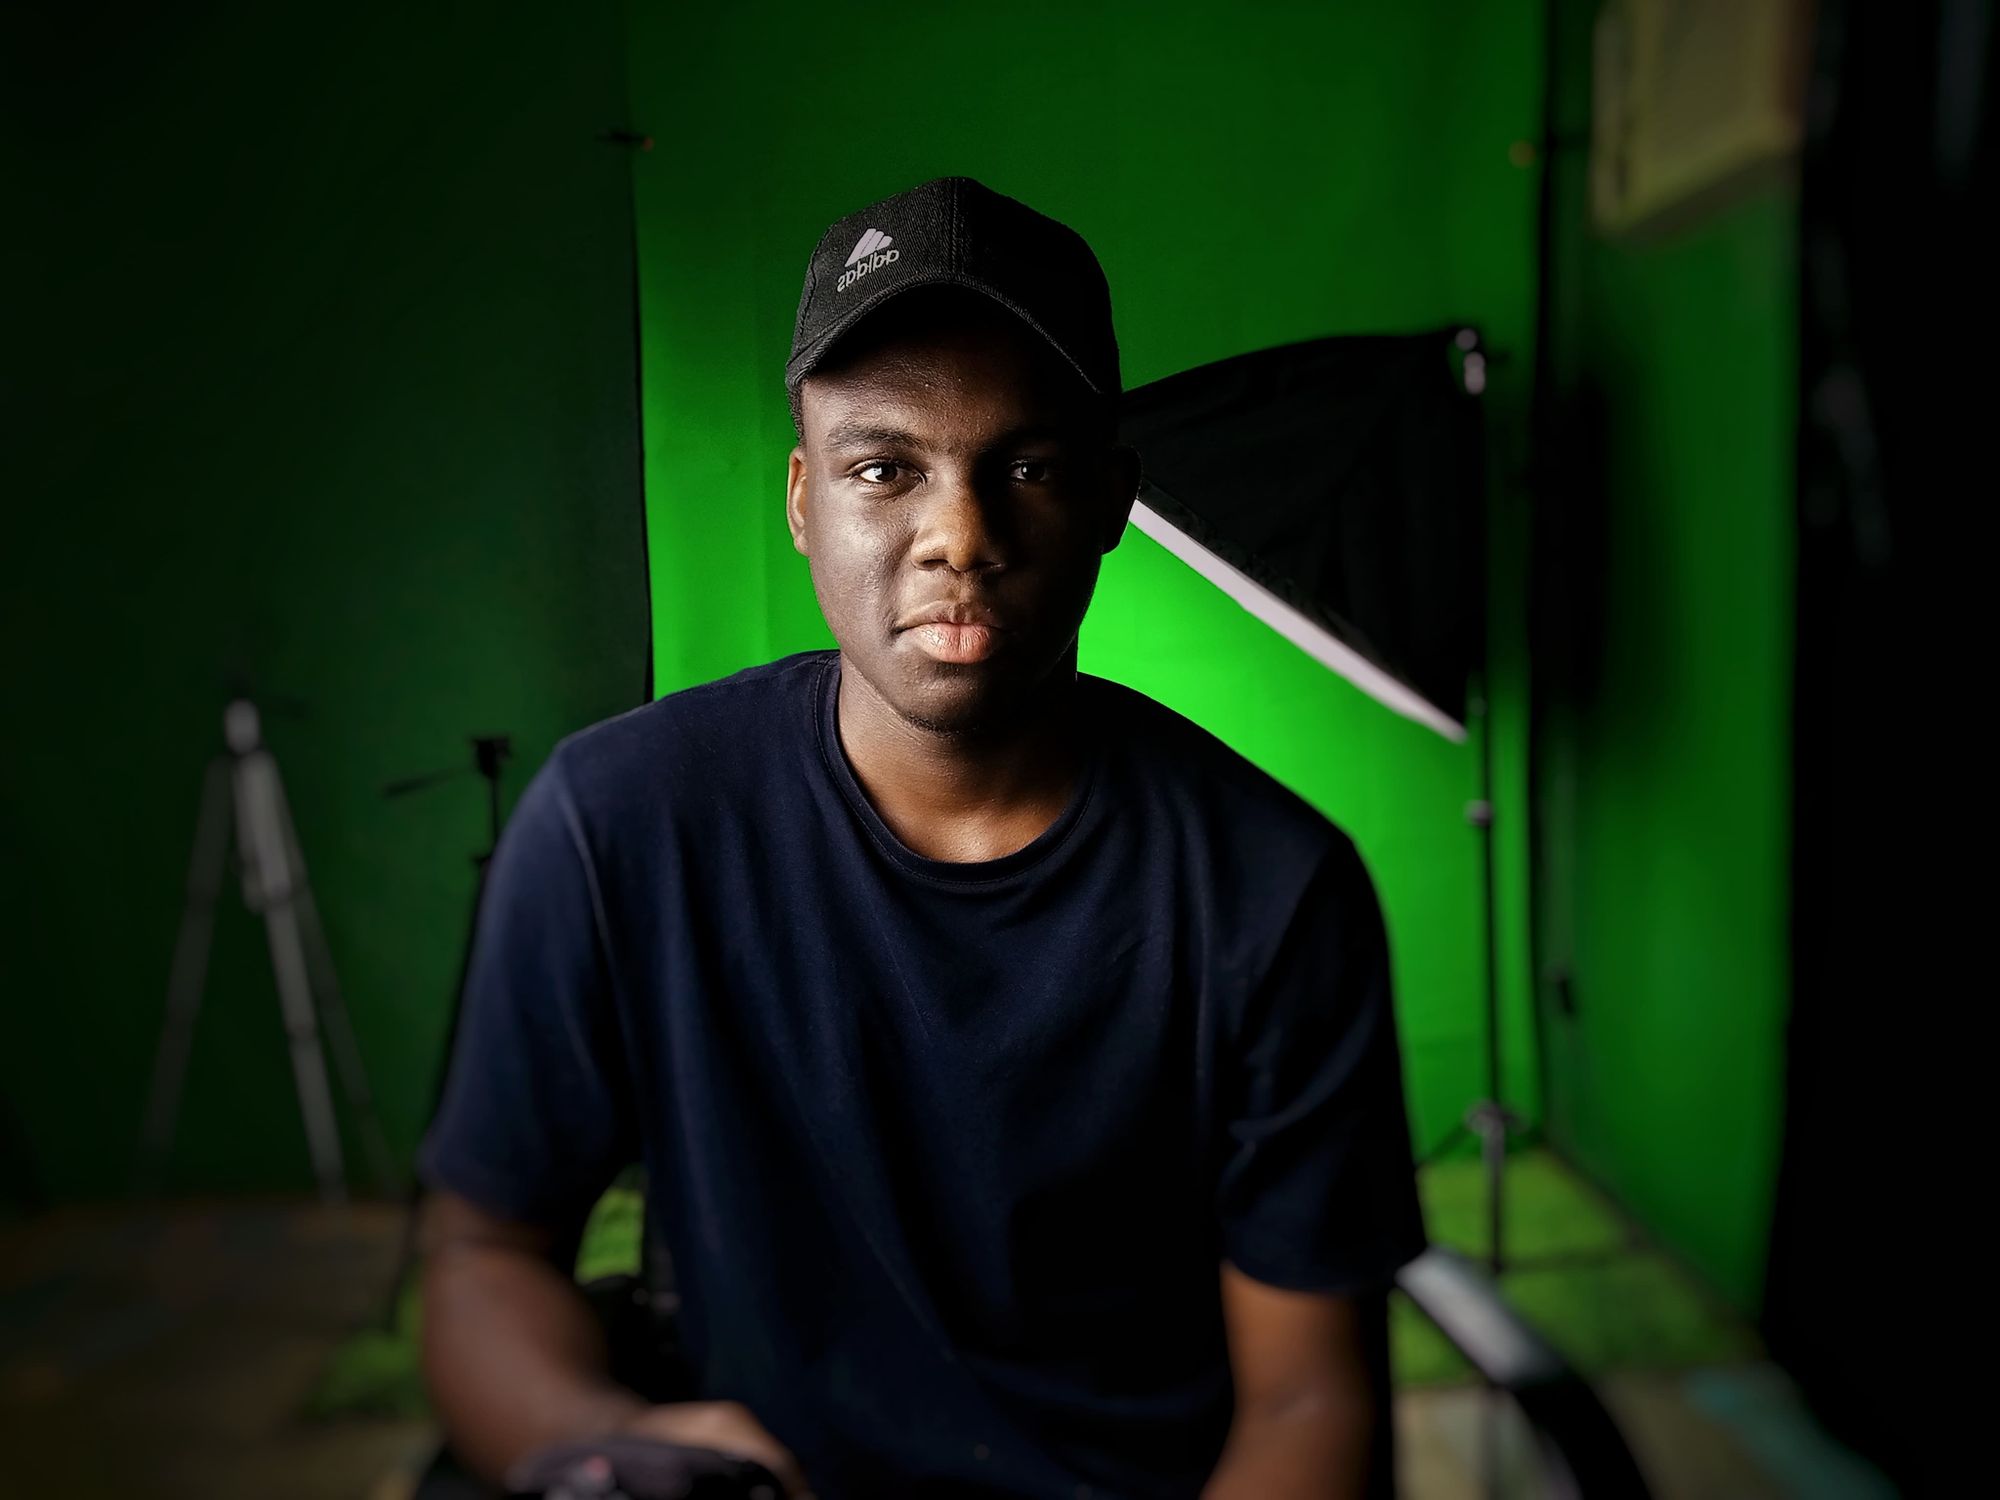 A man sitting in front of a green screen